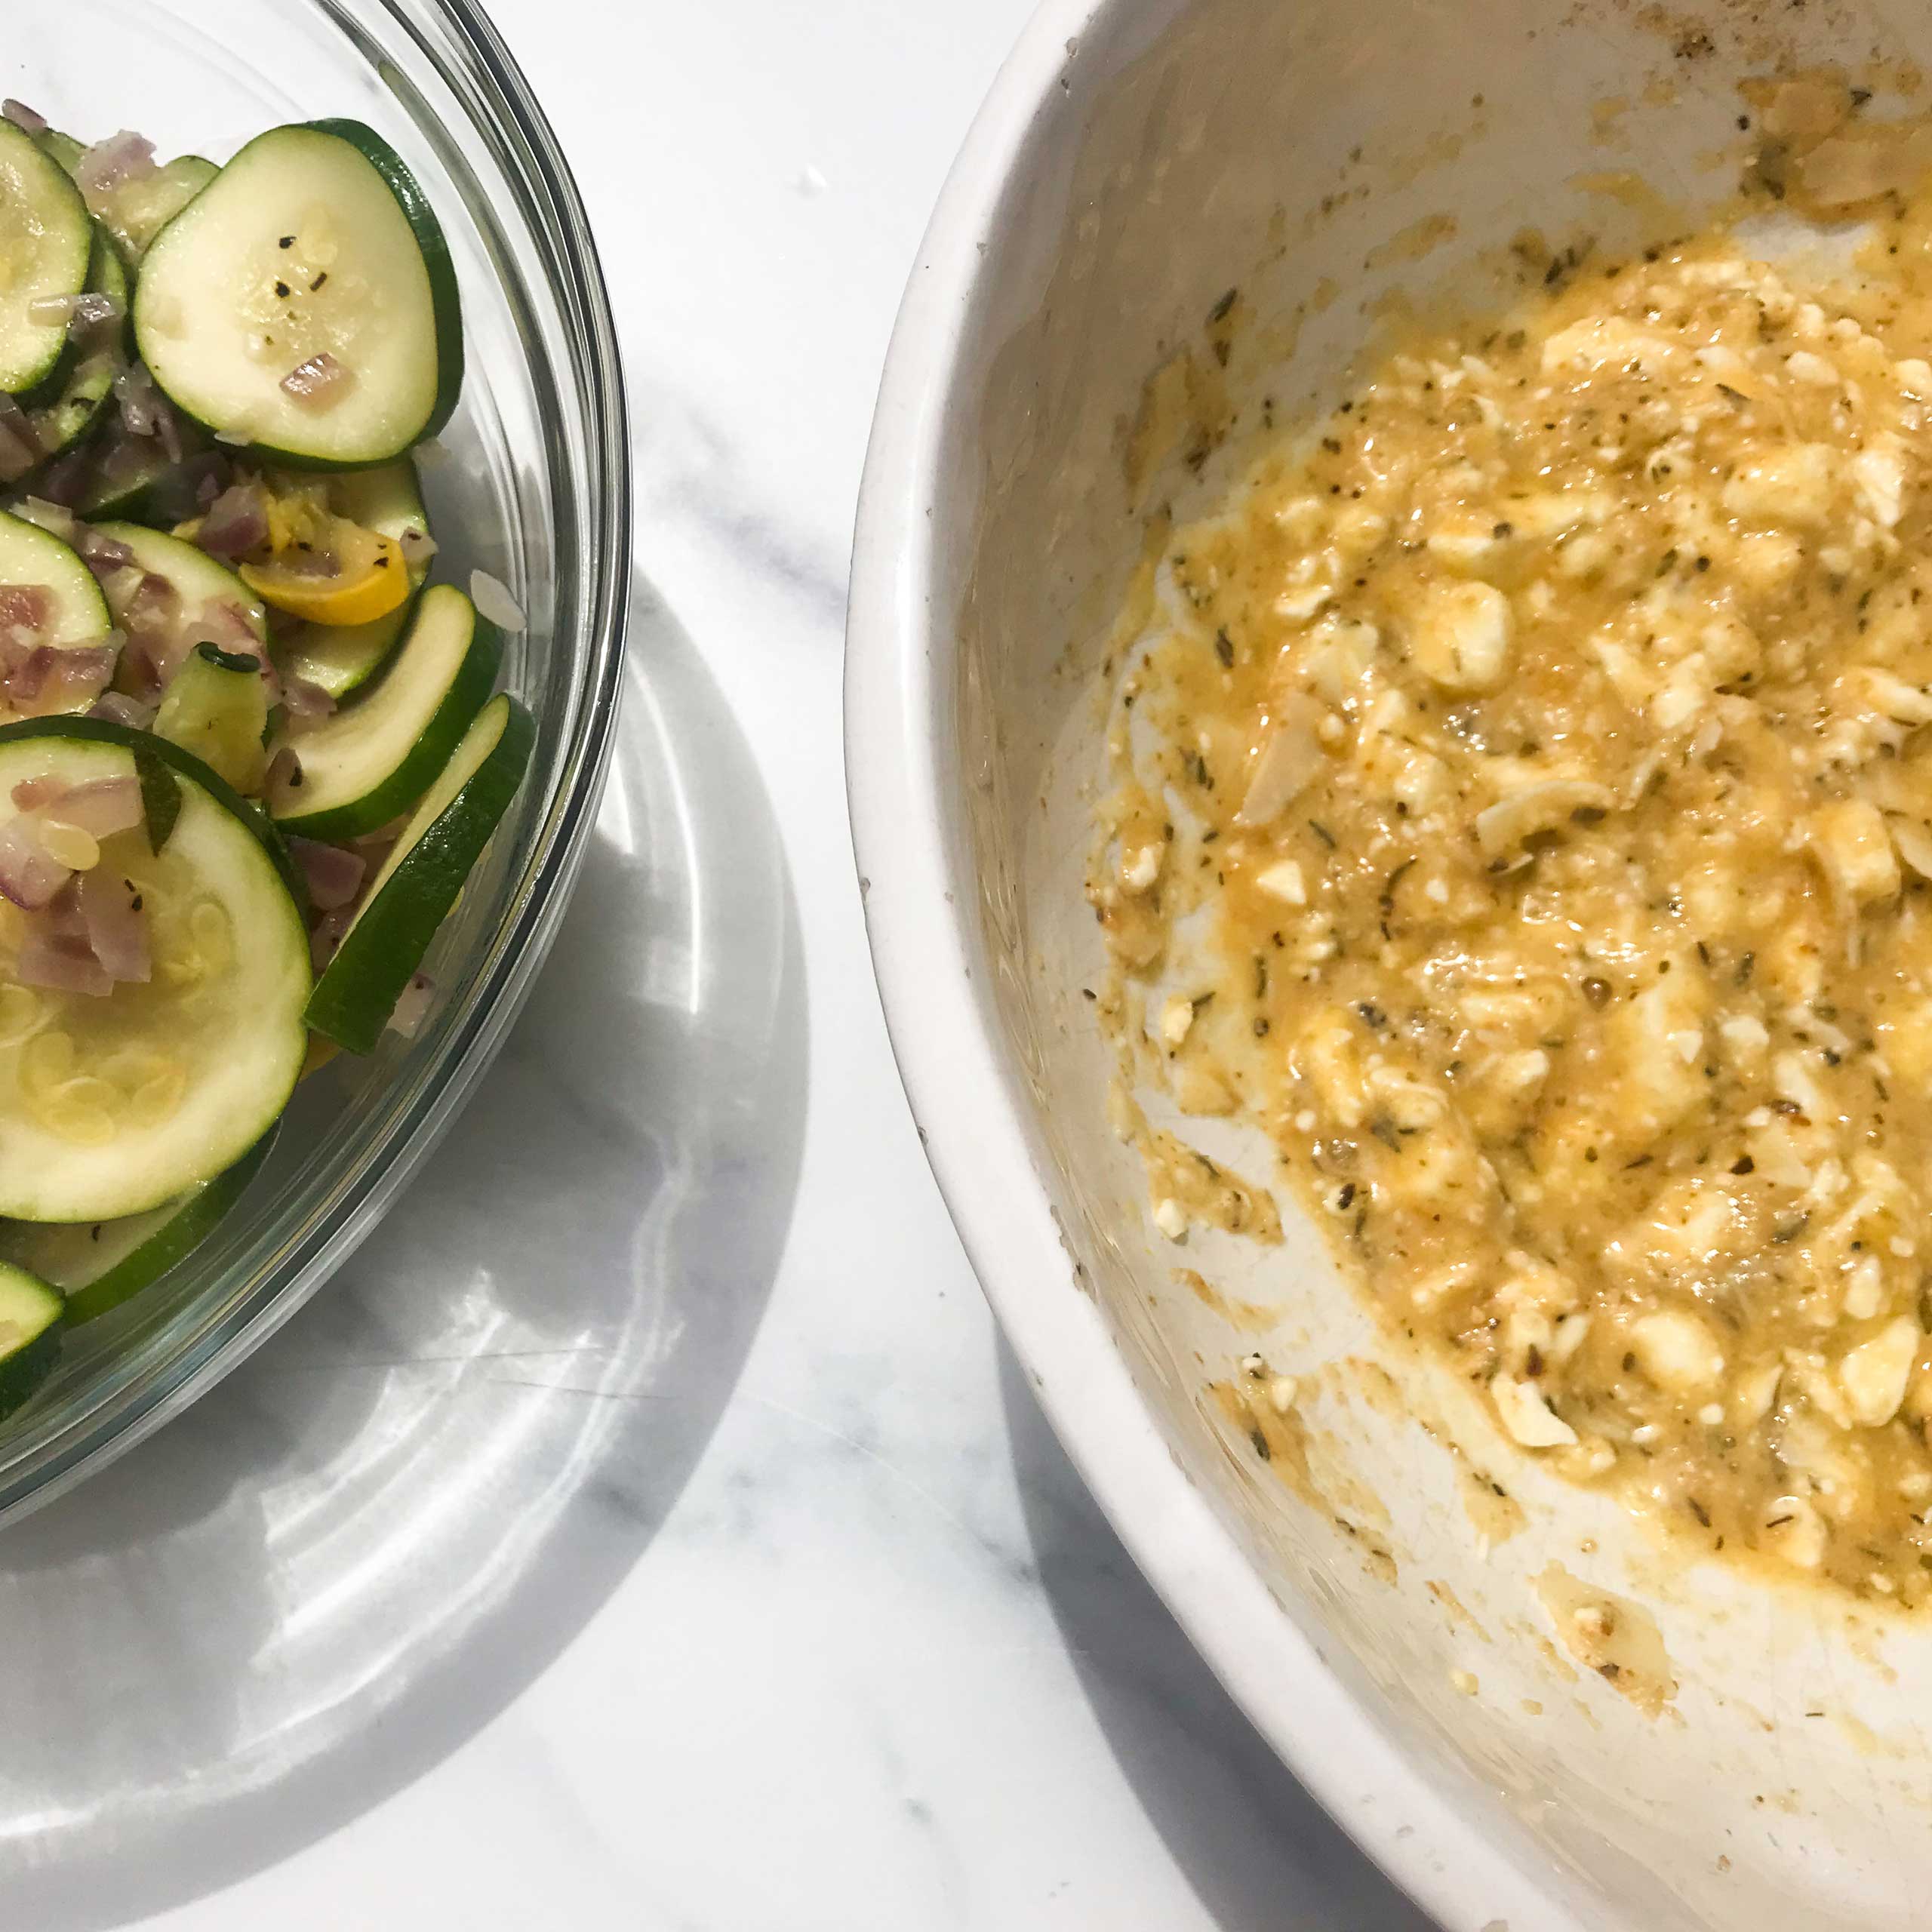 bowl of cooking zucchini next to bowl of mixed wet ingredients